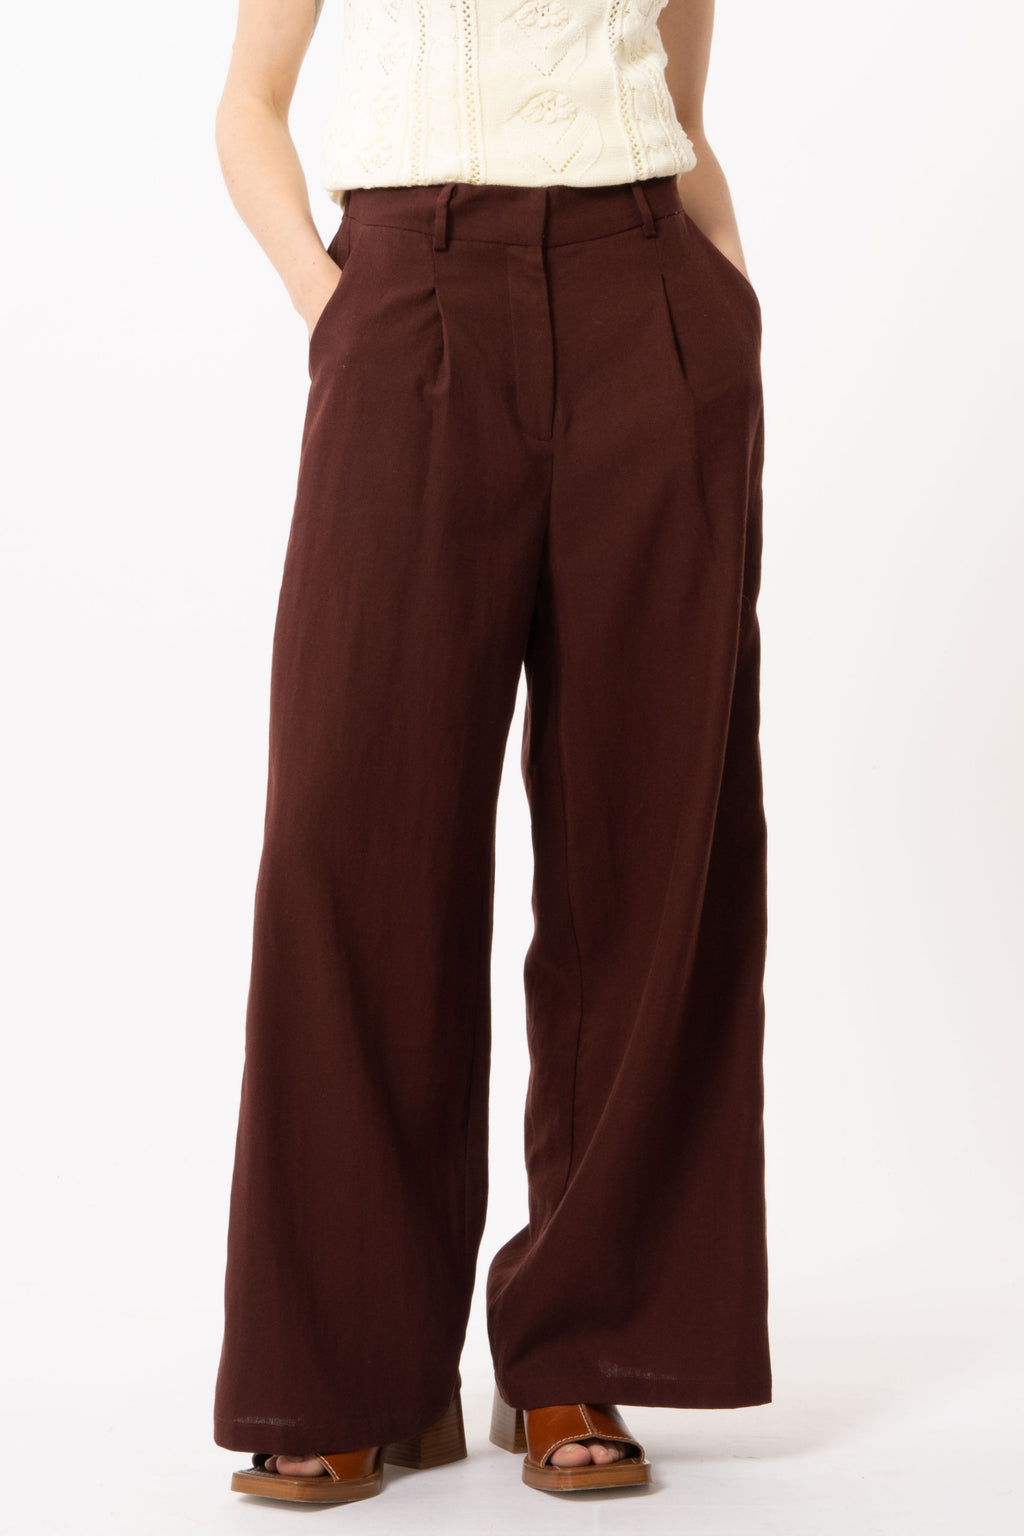 Quince Stretch Cotton Twill Wide-Leg Crop Pant Rust Brown High Rise Size 27  - $45 - From Abbey